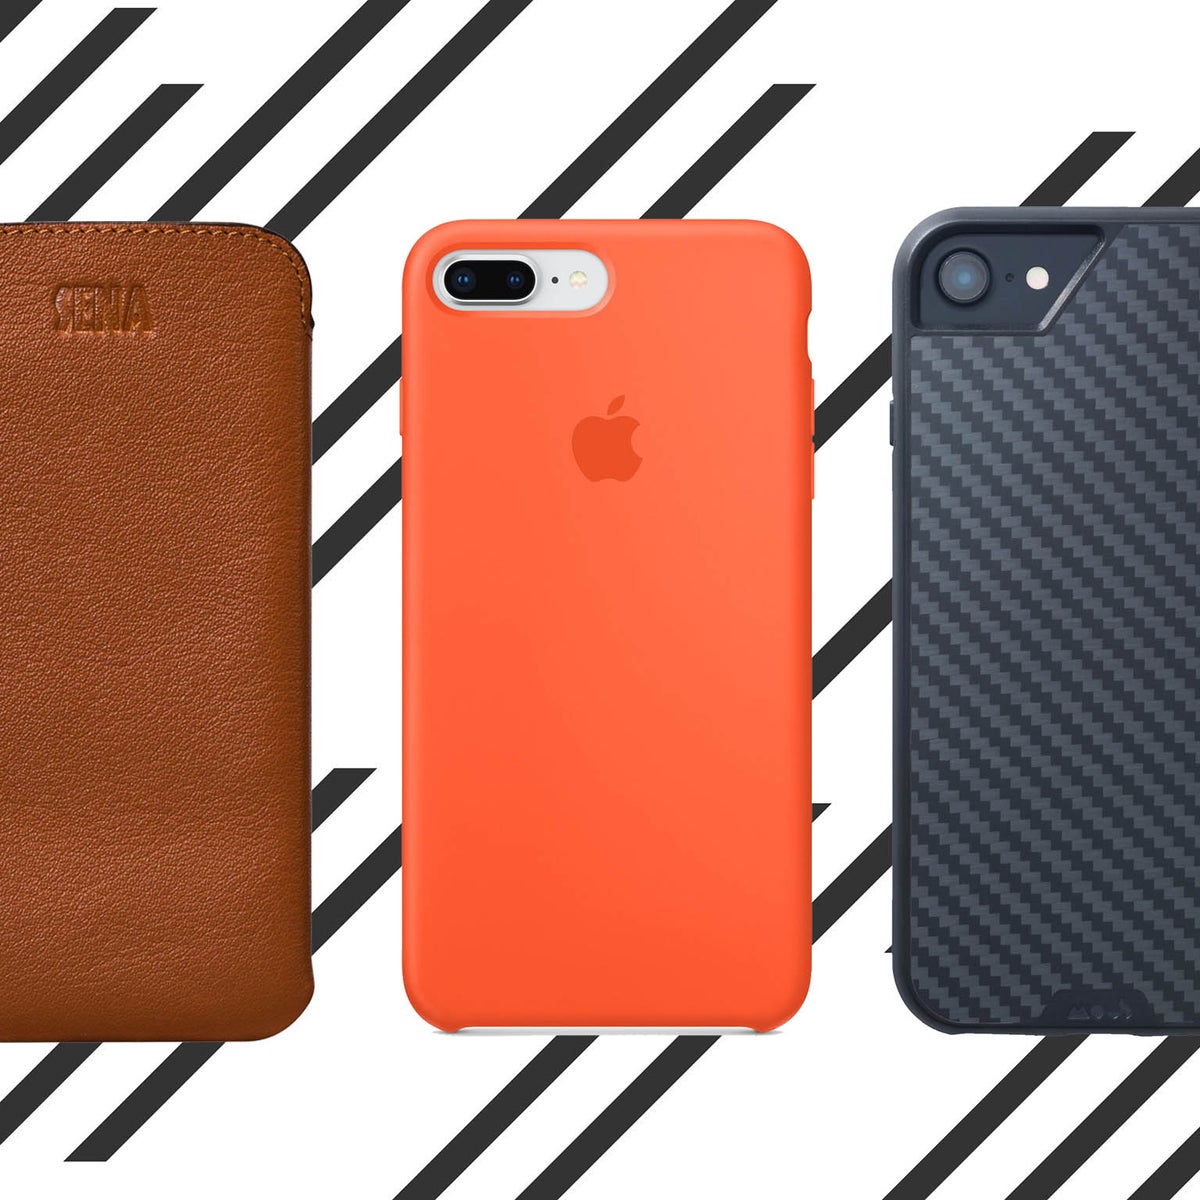 Best iPhone 8 and 8 plus cases for screen protection and wireless